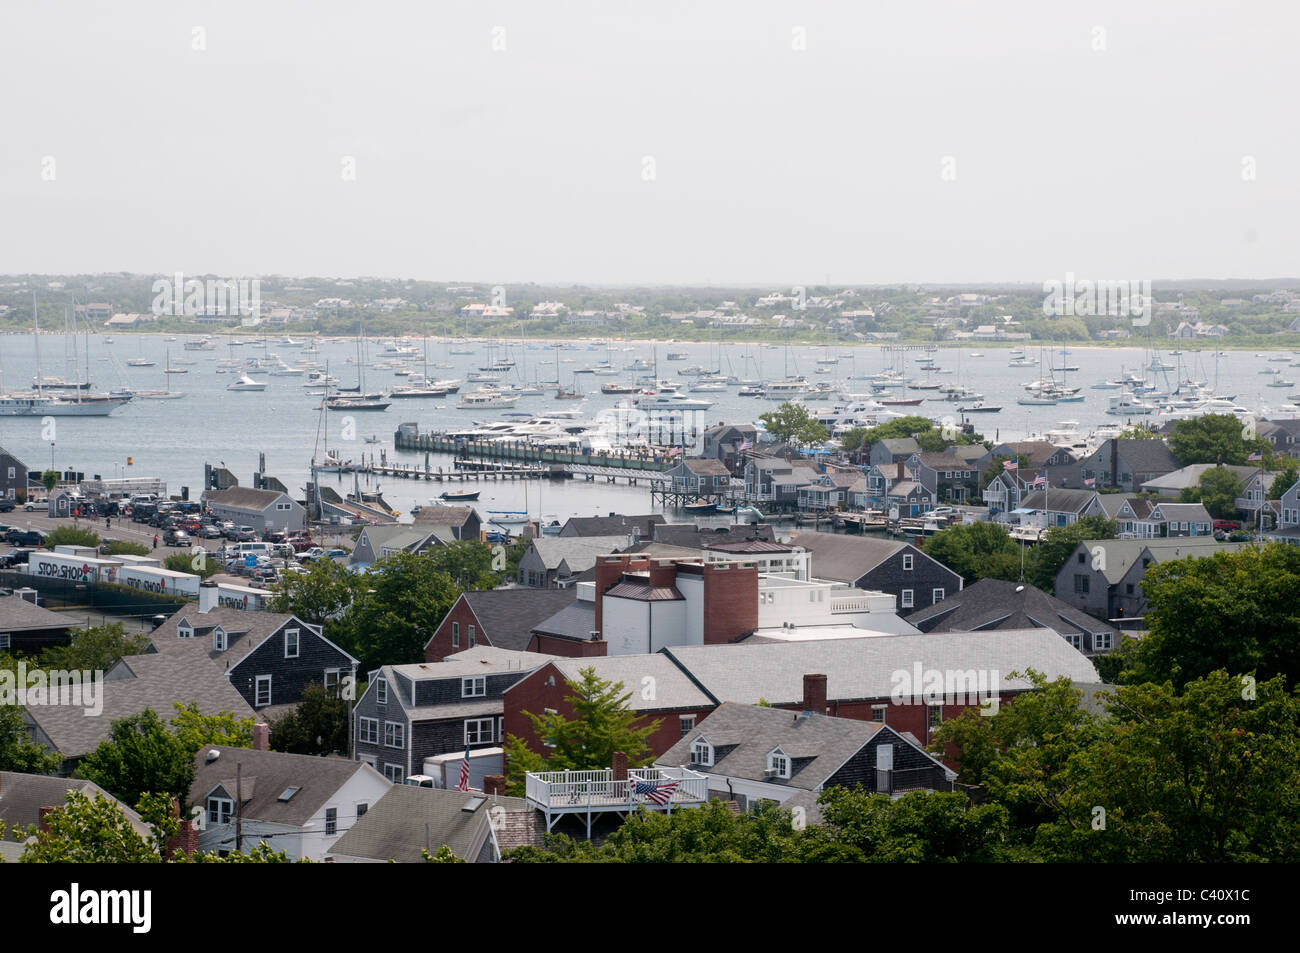 A view of Nantucket Town and harbor from the First Congressional Church. Stock Photo